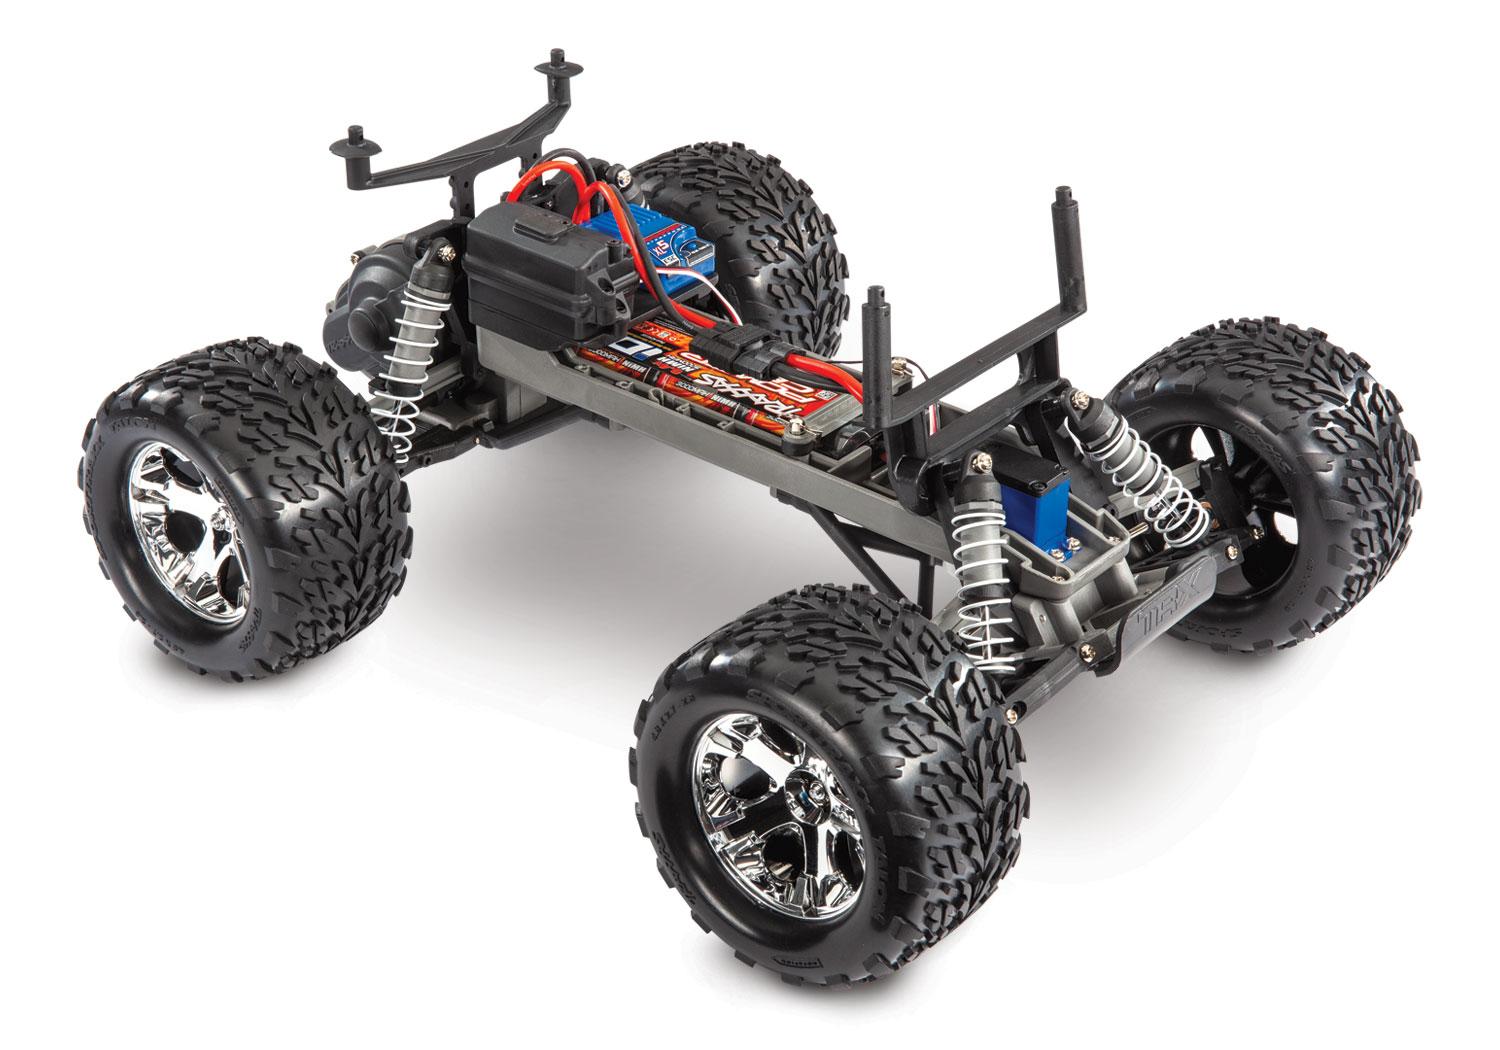 Traxxas Stampede 4X4 Vxl: Enhance Your Traxxas Stampede 4x4 VXL With Custom Upgrades and Accessories